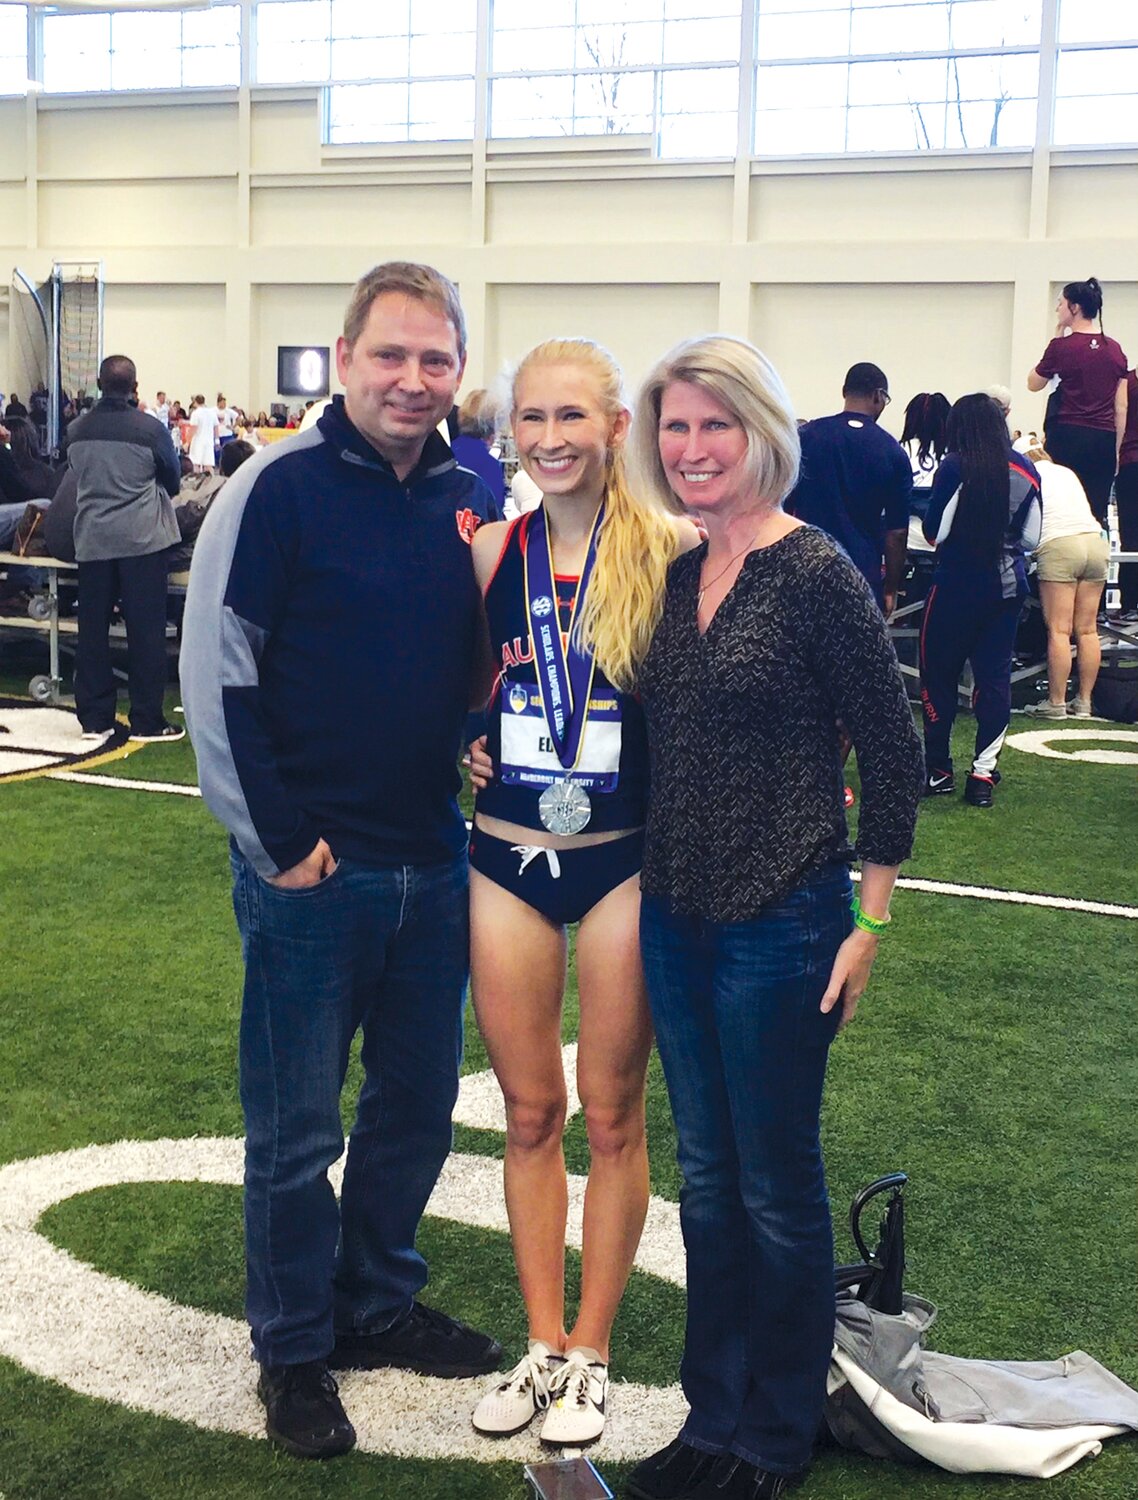 At the 2017 Southeastern Conference championships, Auburn University’s Veronica Eder, center, is congratulated by her dad, Jim left, and mom, Karen, after Veronica finished second in the 5,000 meters and third in the 3,000 meters.